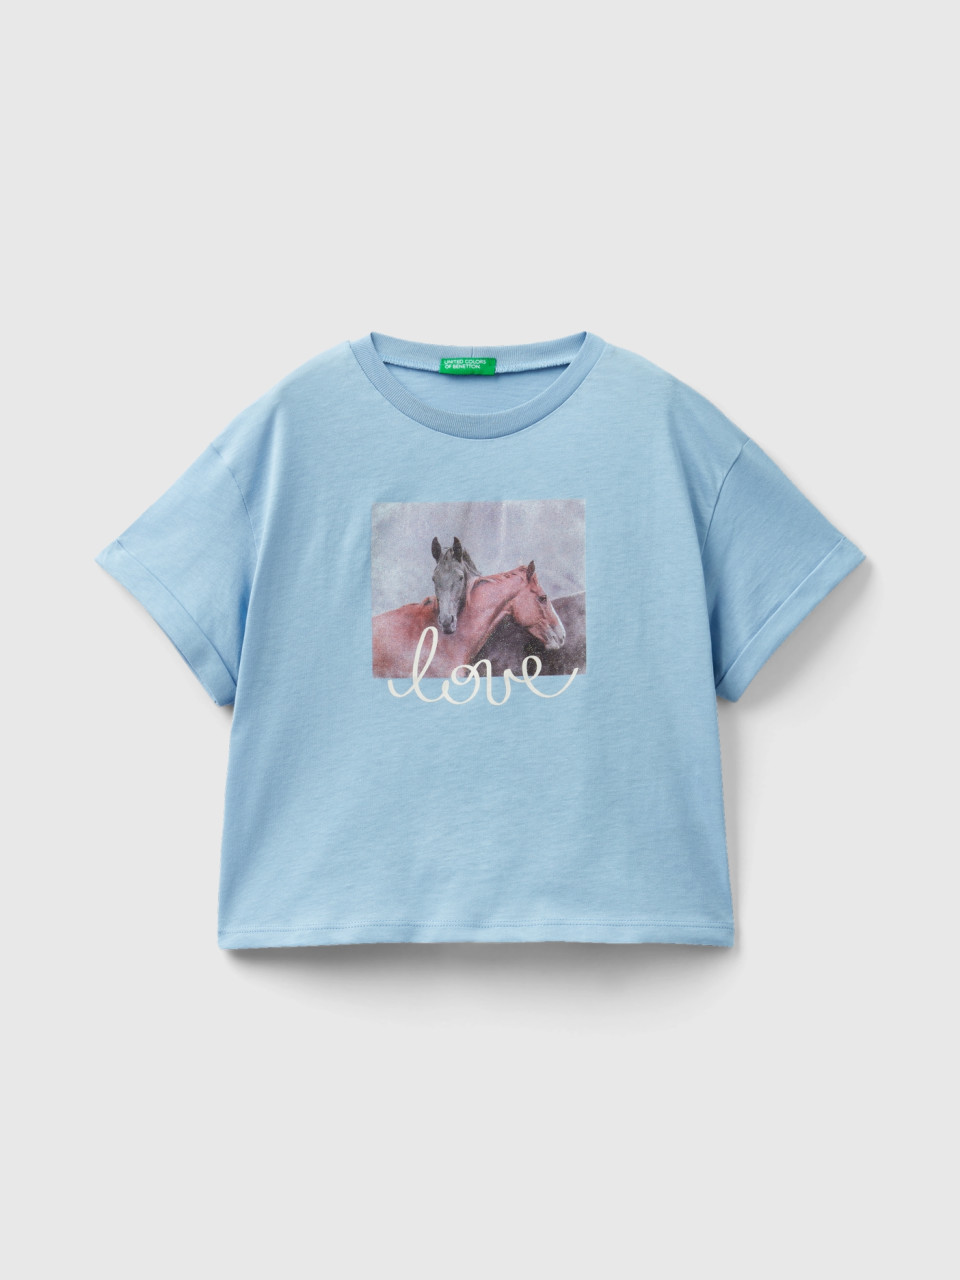 Benetton, T-shirt With Photographic Horse Print, Sky Blue, Kids